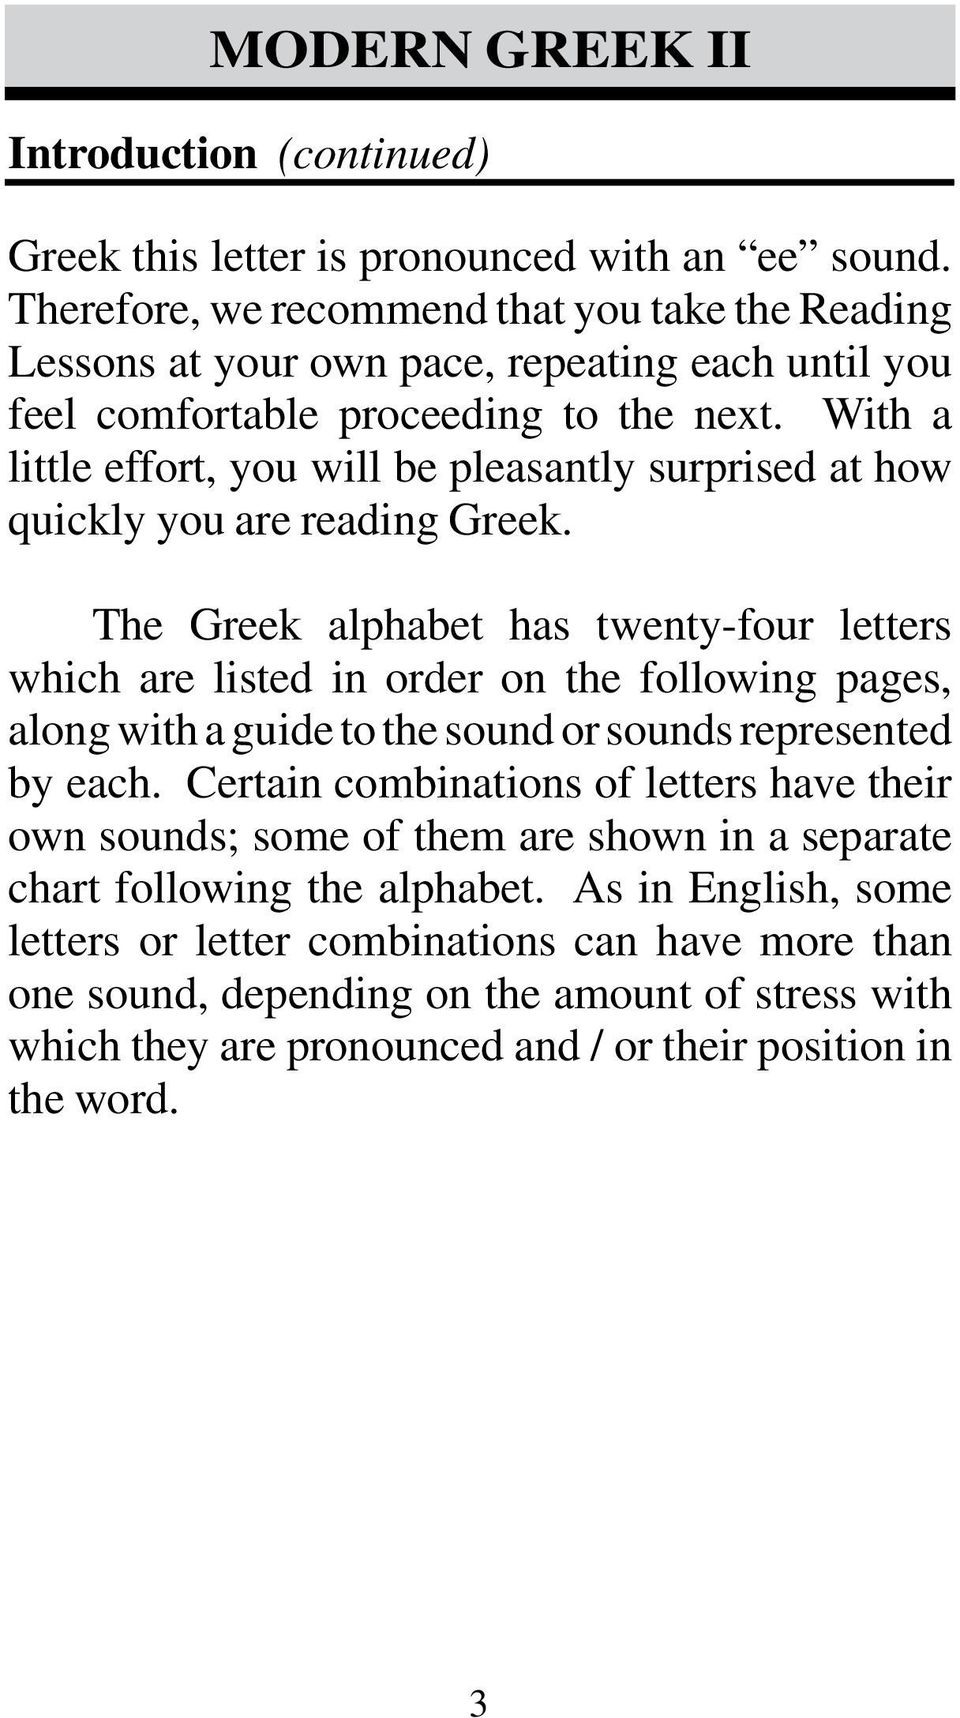 With a little effort, you will be pleasantly surprised at how quickly you are reading Greek.